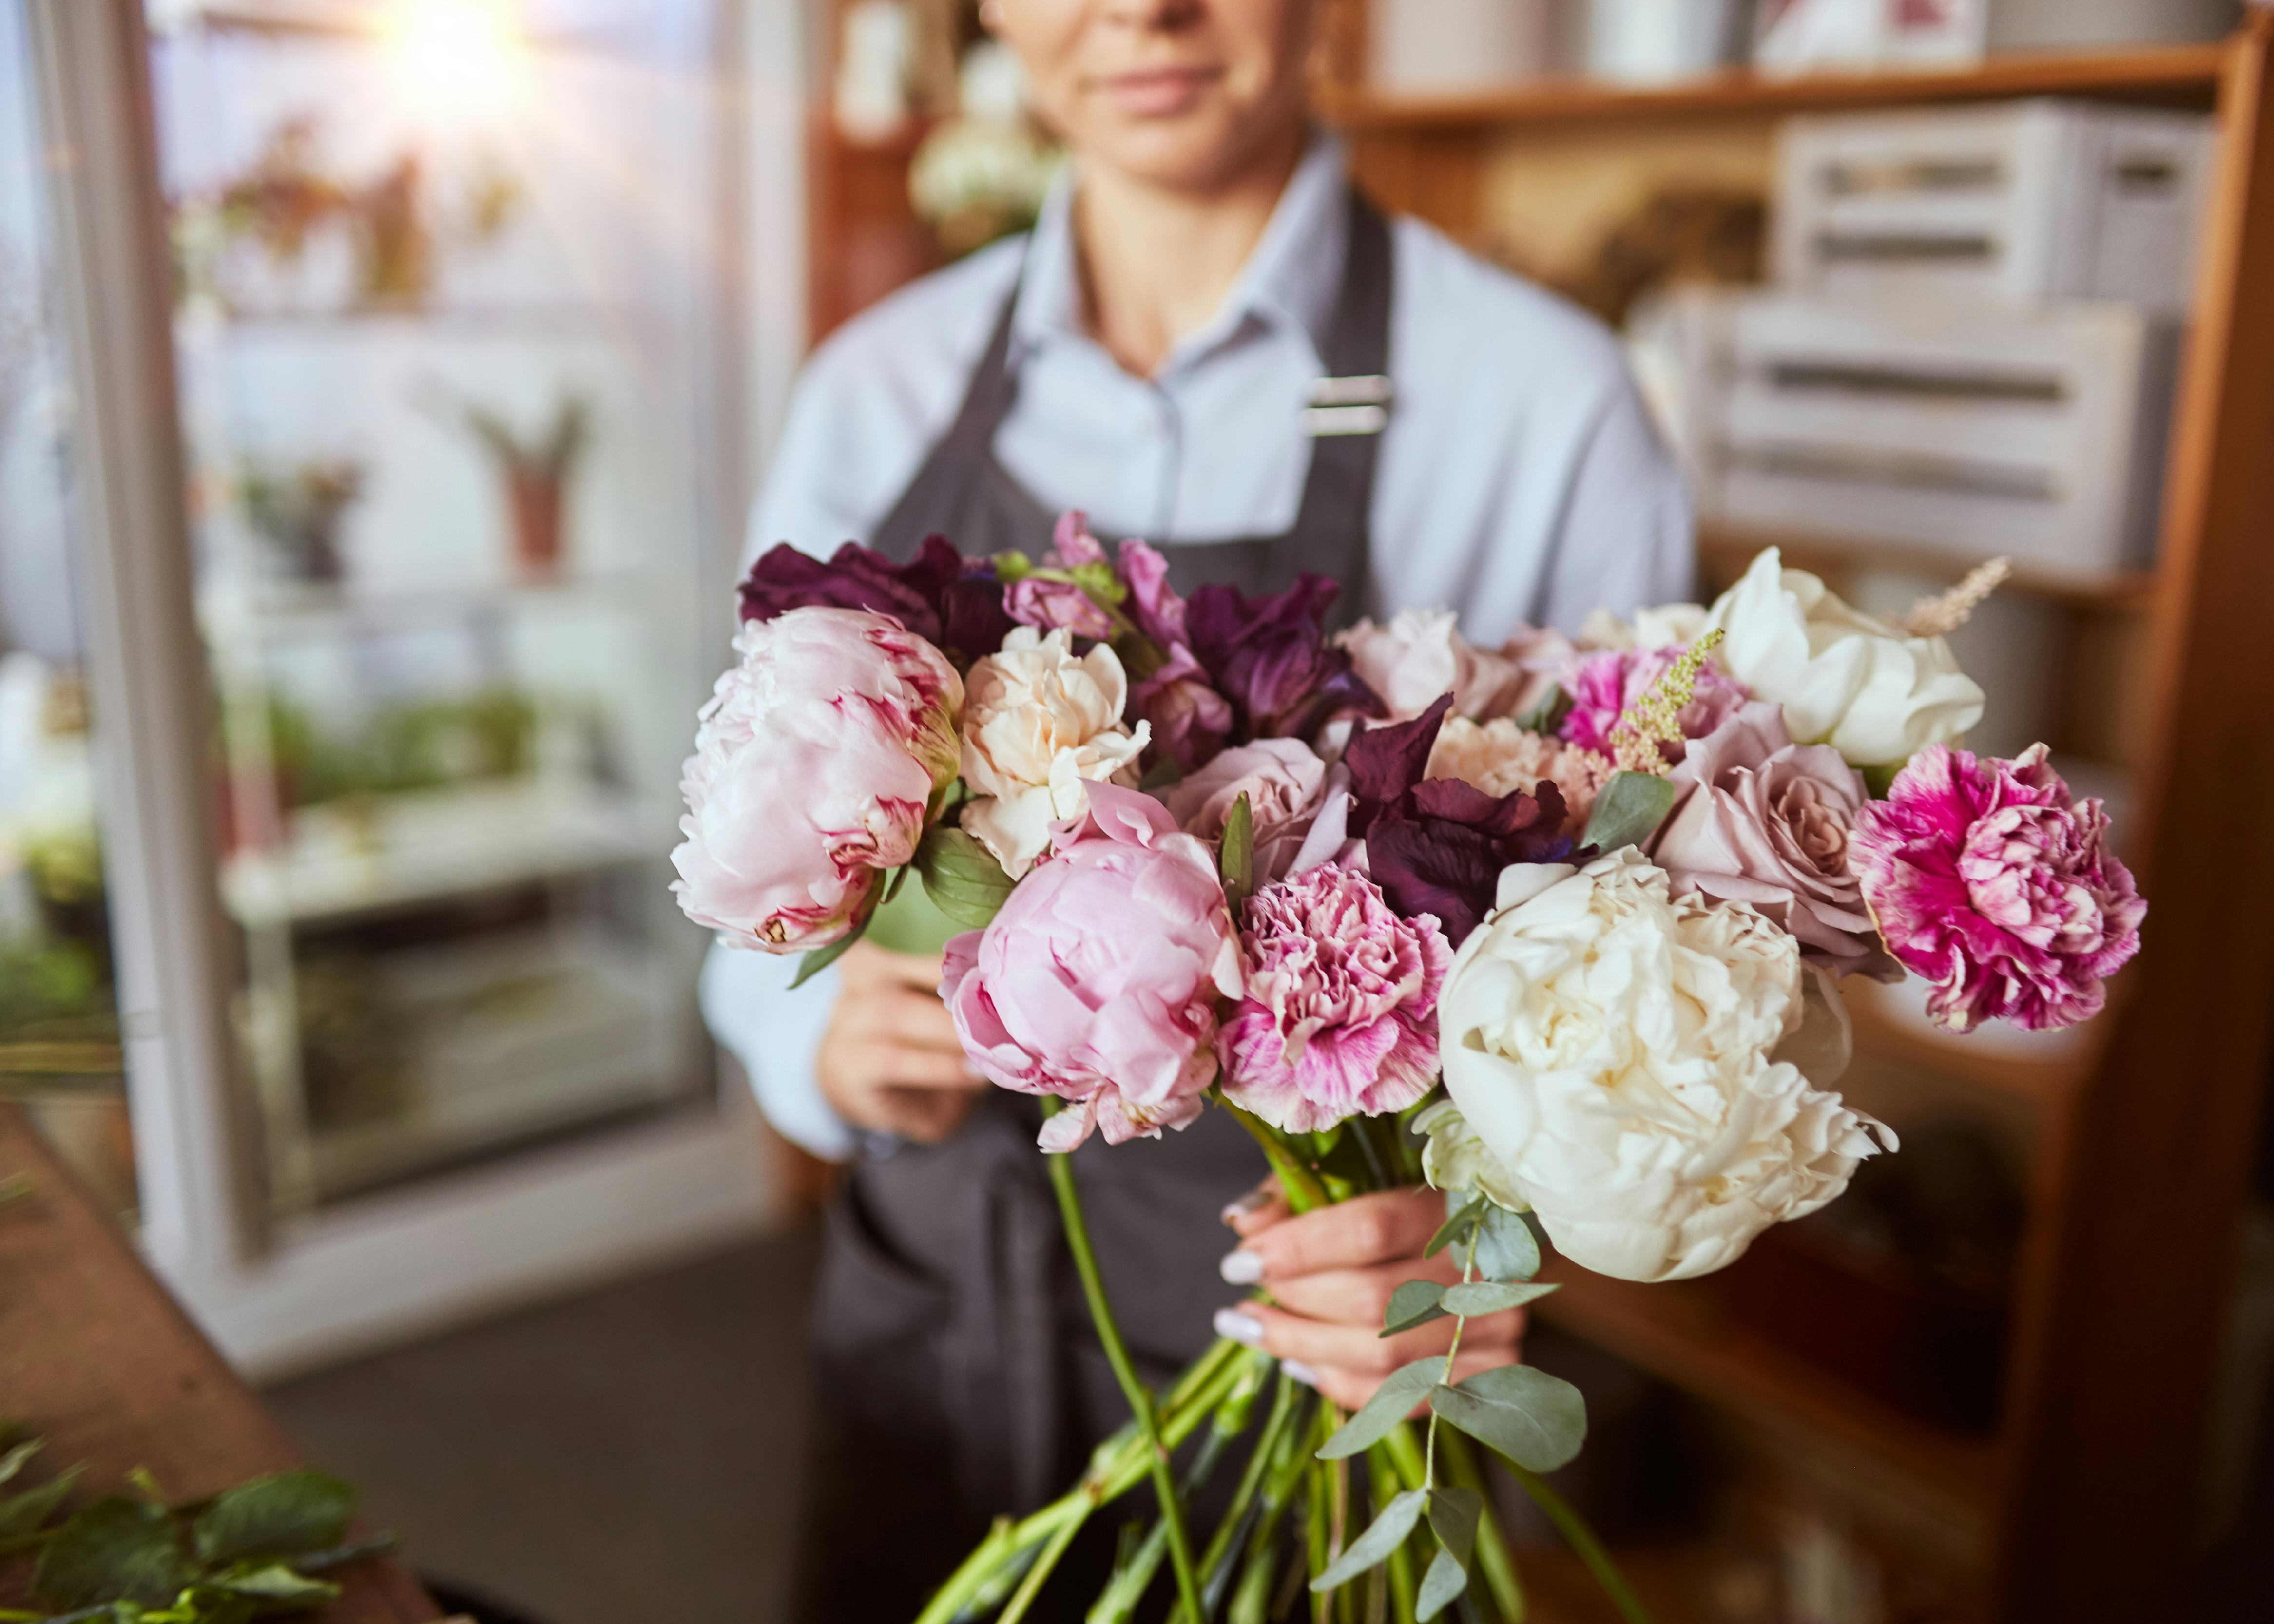 An employee in an apron is holding out a bunch of pink and white flowers, including roses.